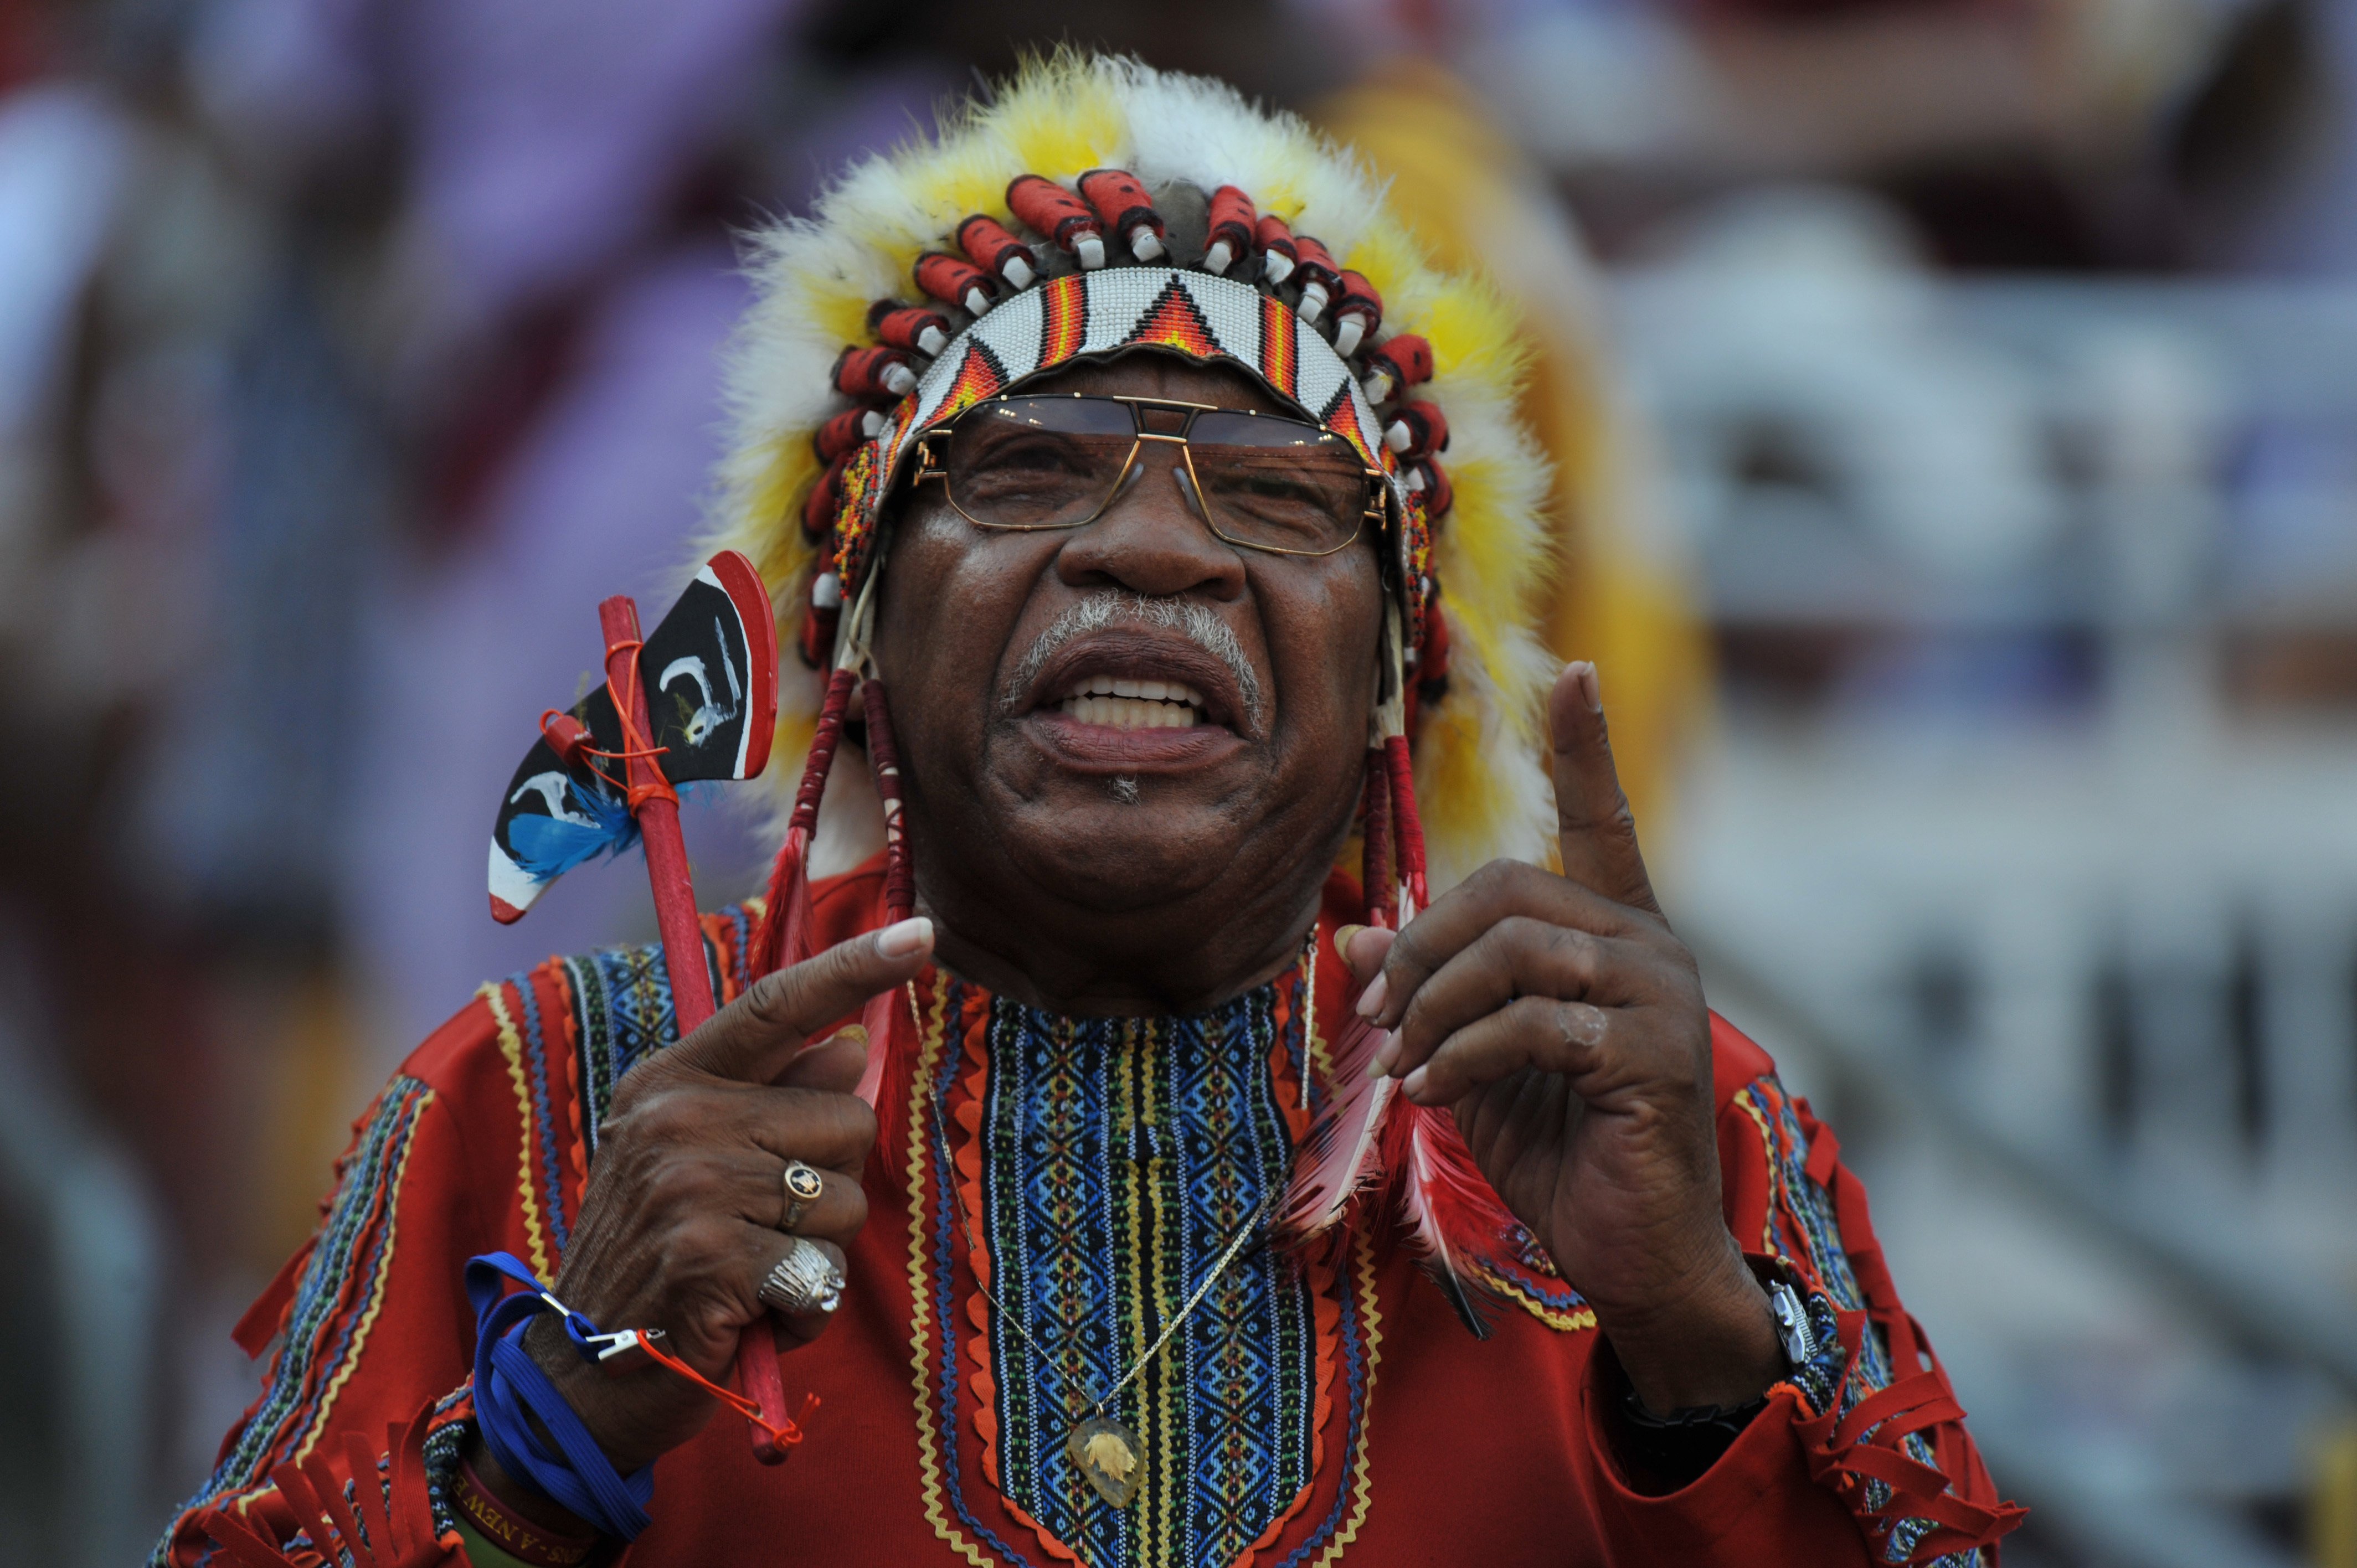 LANDOVER - SEPTEMBER 19:  A fan of the Washington Redskins cheers against the Houston Texans at FedExField on September 19, 2010 in Landover, Maryland. The Texans defeated the Redskins in overtime 30-27. (Photo by Larry French/Getty Images)